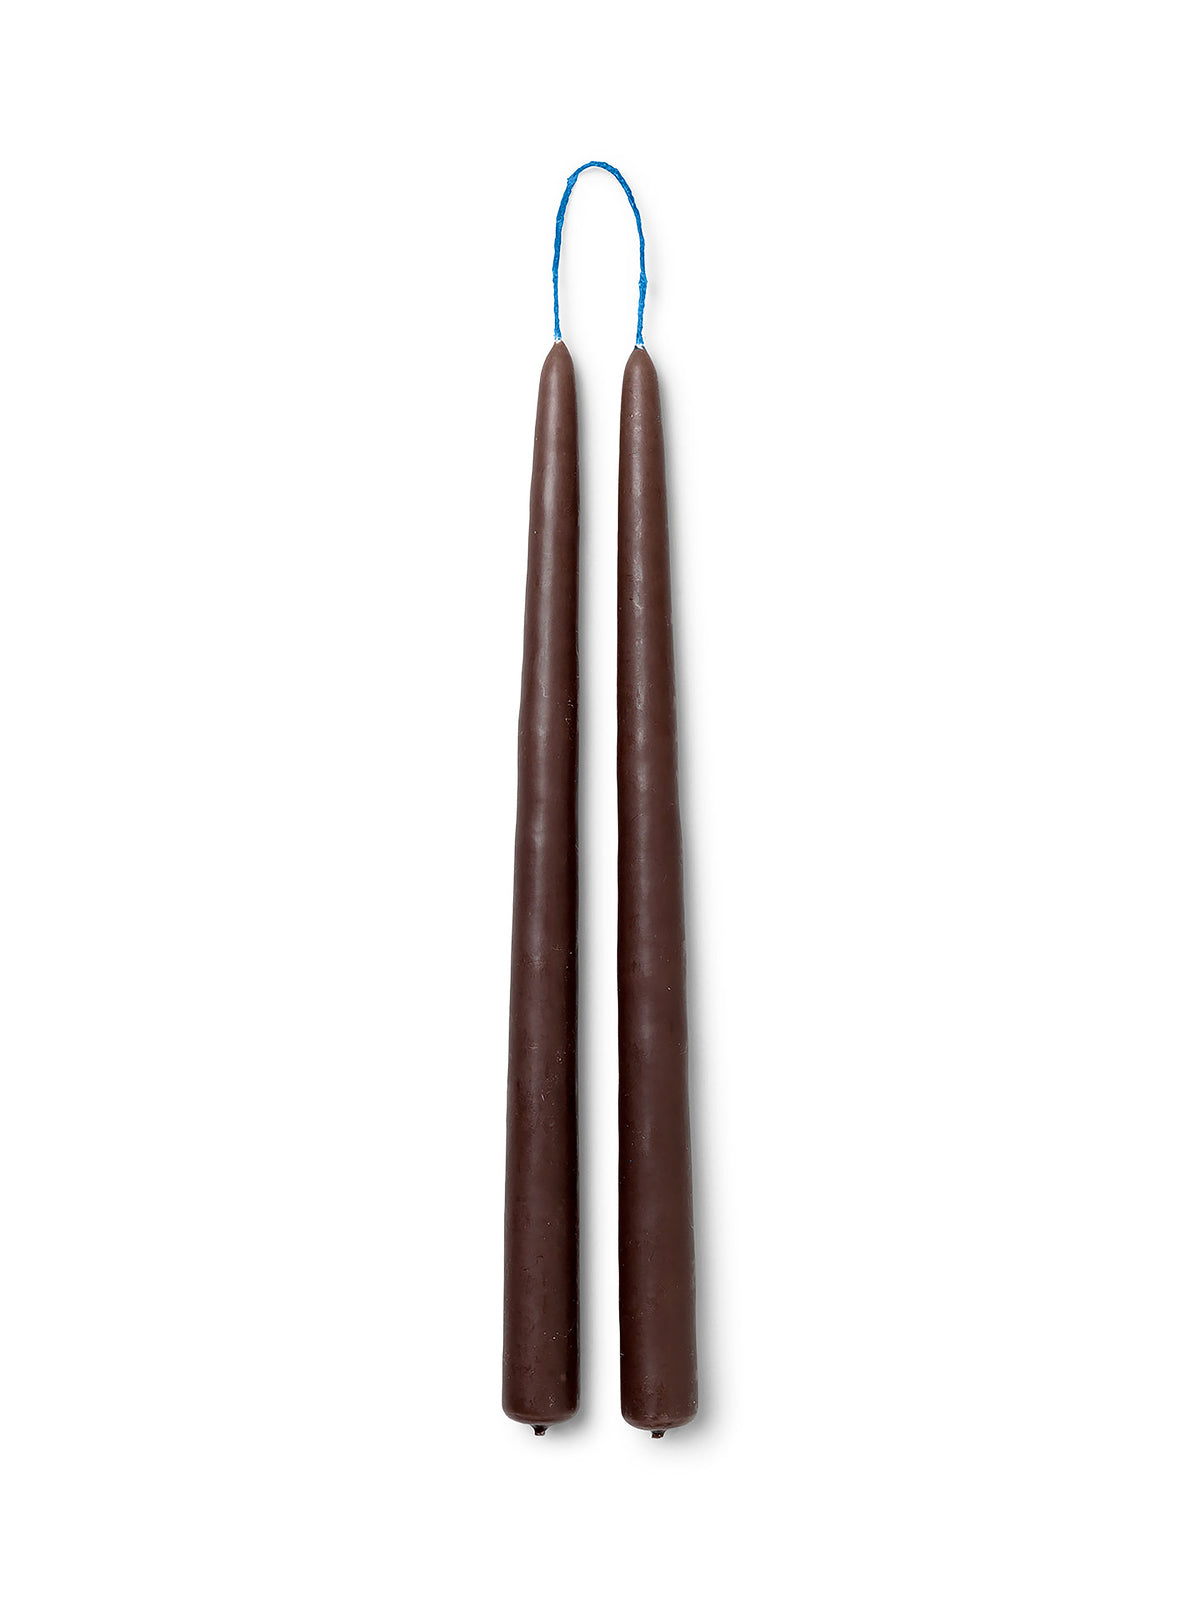 Dipped Candles | Brown | Set of 2 | by ferm Living - Lifestory - ferm LIVING